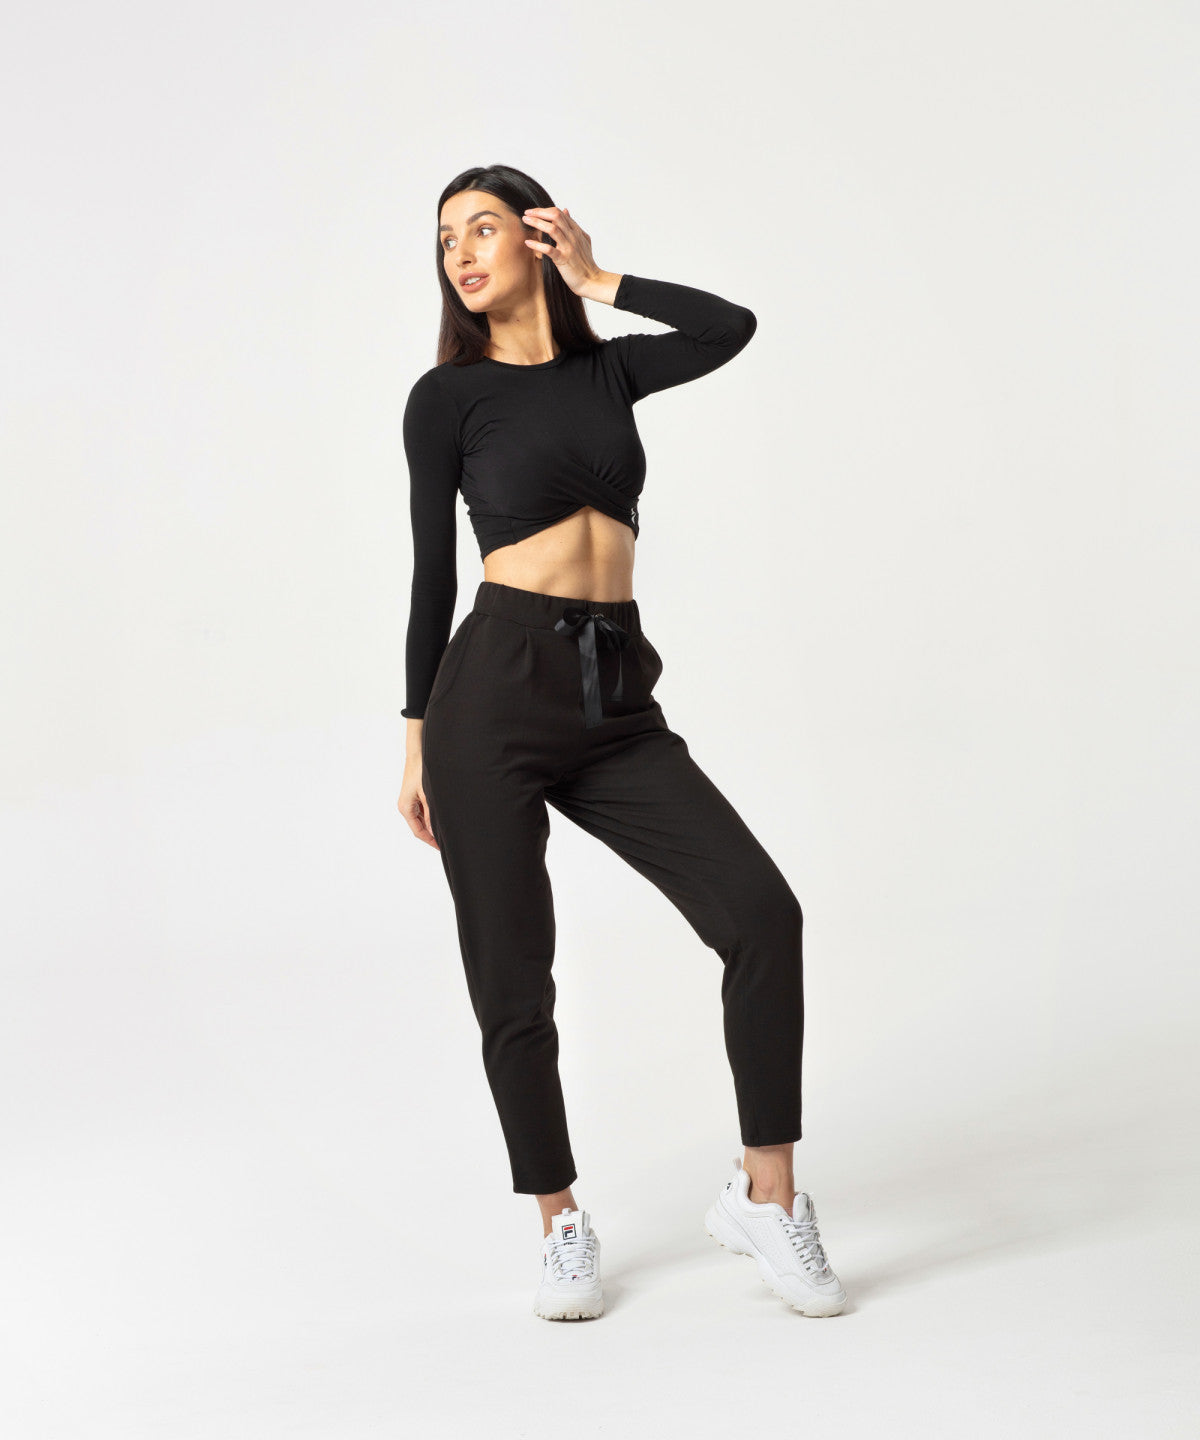 Carpatree Ultimate Tied Sweatpants - Black jogger style tracksuit bottoms with ribbon tie, elasticated waist and pockets. Made of strong stretch cotton.